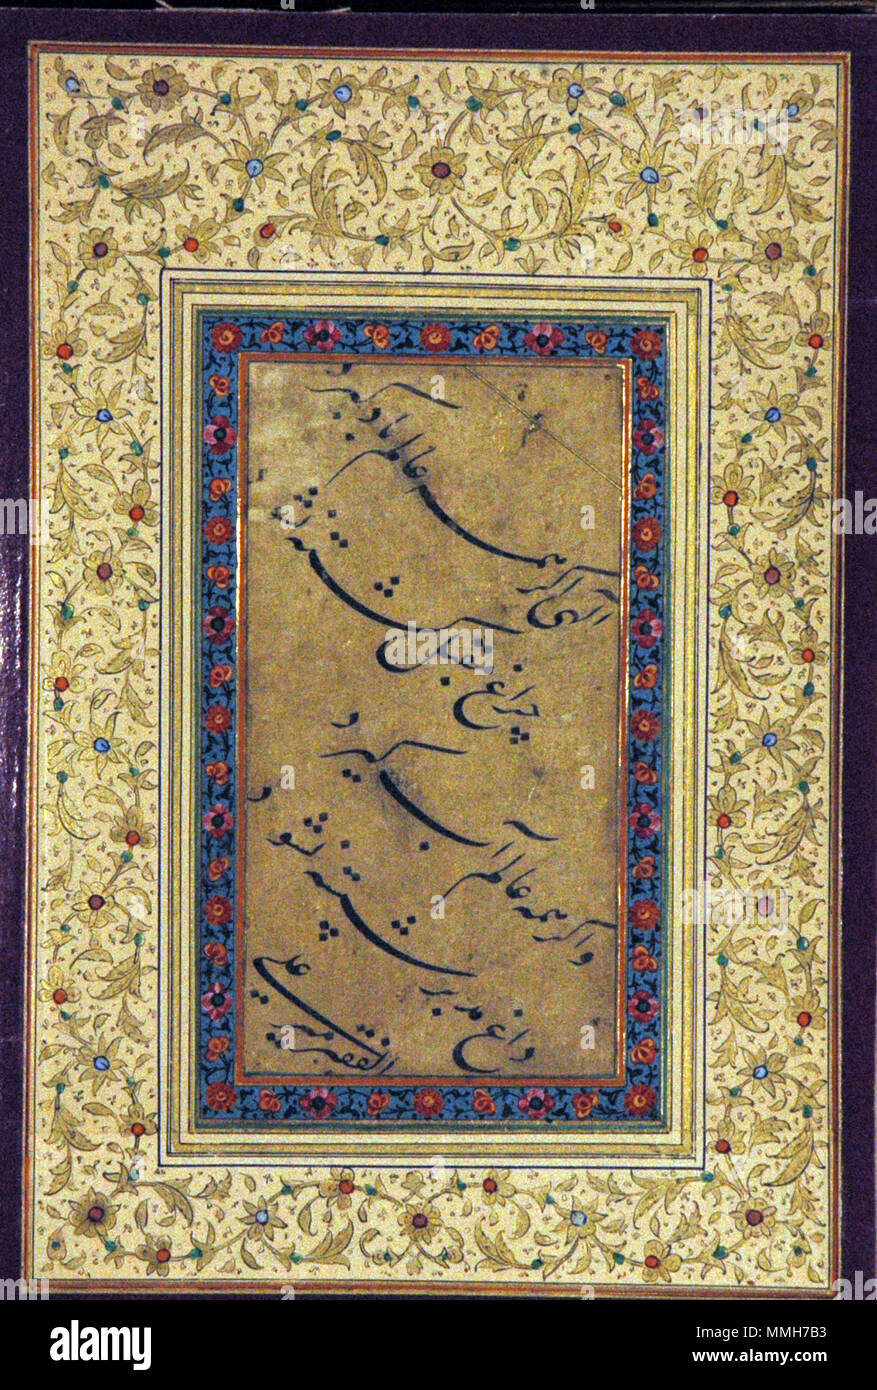 . English: Series Title: [Calligraphy Album] Suite Name: [Calligraphy Album] Creation Date: 1866 Display Dimensions: 11 1/8 in. x 7 5/16 in. (28.26 cm x 18.57 cm) Credit Line: Gift of Edwin Binney 3rd Accession Number: 1971.71 Collection: The San Diego Museum of Art  . 23 May 2007, 13:52:02. English: thesandiegomuseumofartcollection Album of calligraphy (6124496111) Stock Photo